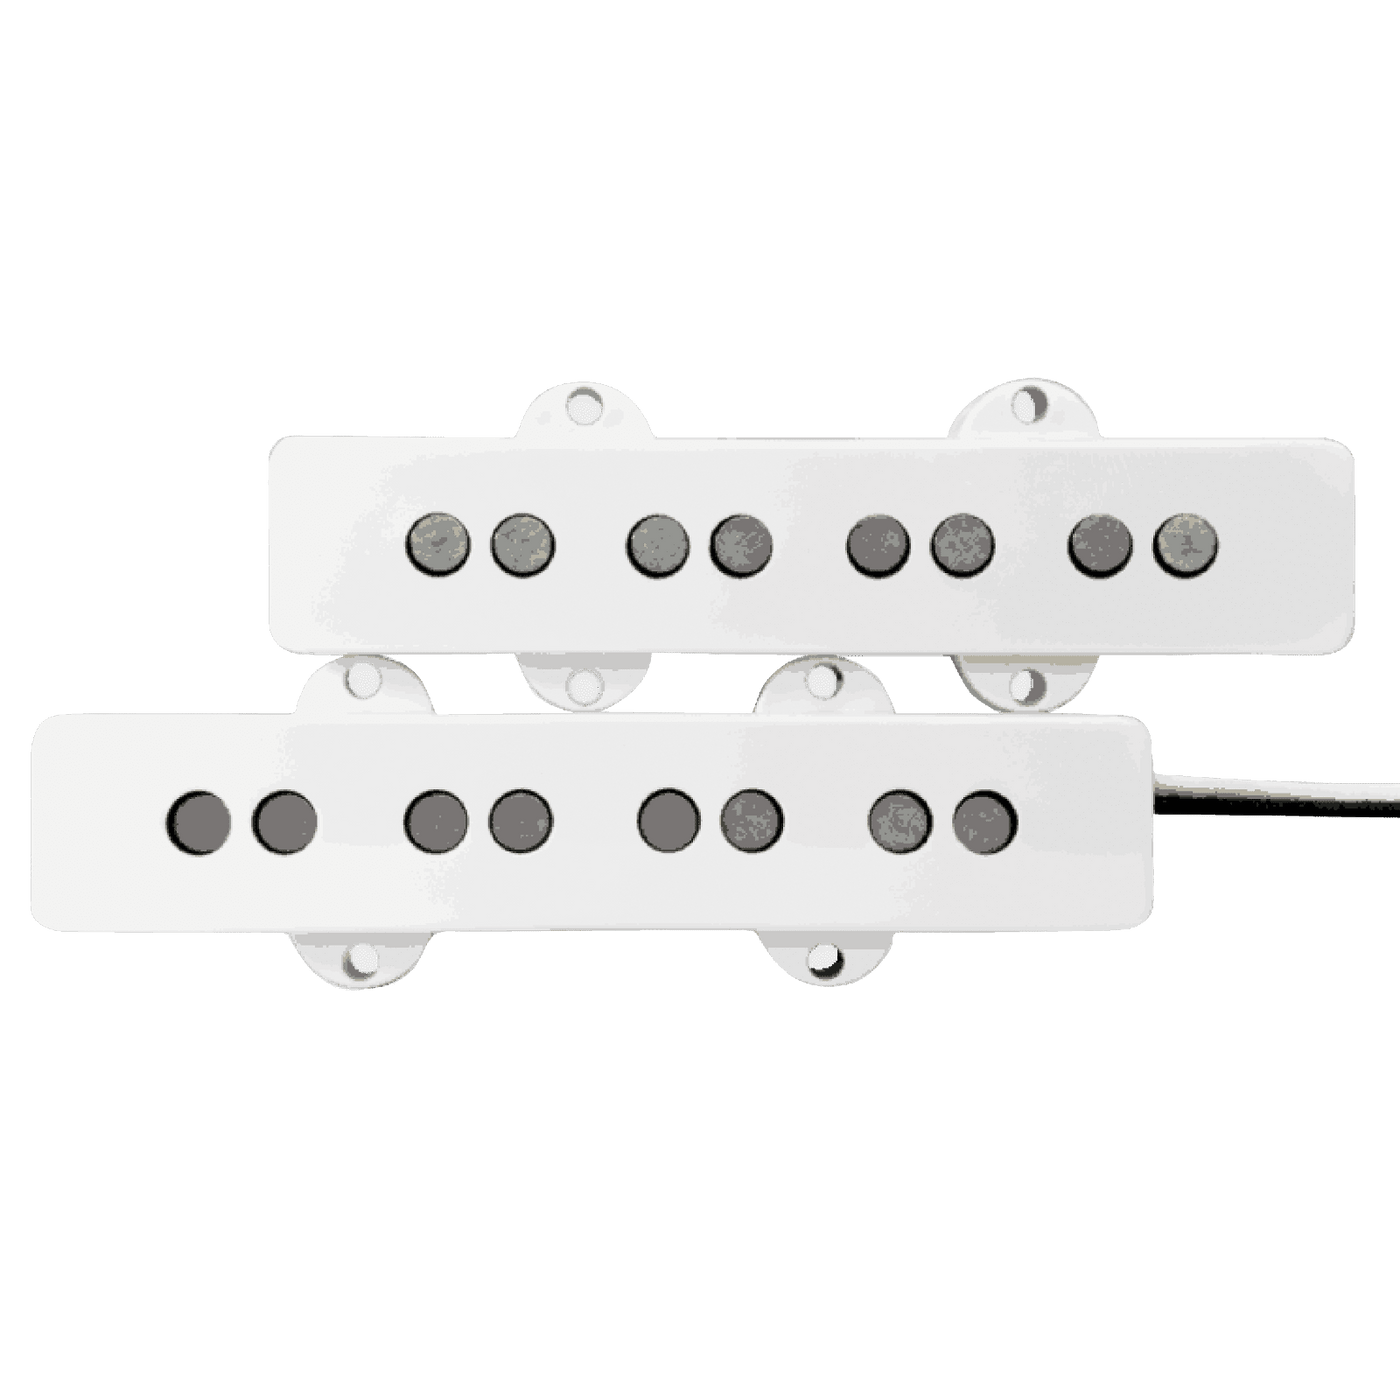 Lindy Fralin Jazz Bass 4 White Cover - DescriptionFralin Jazz Bass Pickups are fat, loud, punchy, and clear. They have articulation and definition not found in other manufacturers’ pickups. We use all USA-Made parts, and wind and build them one at a time